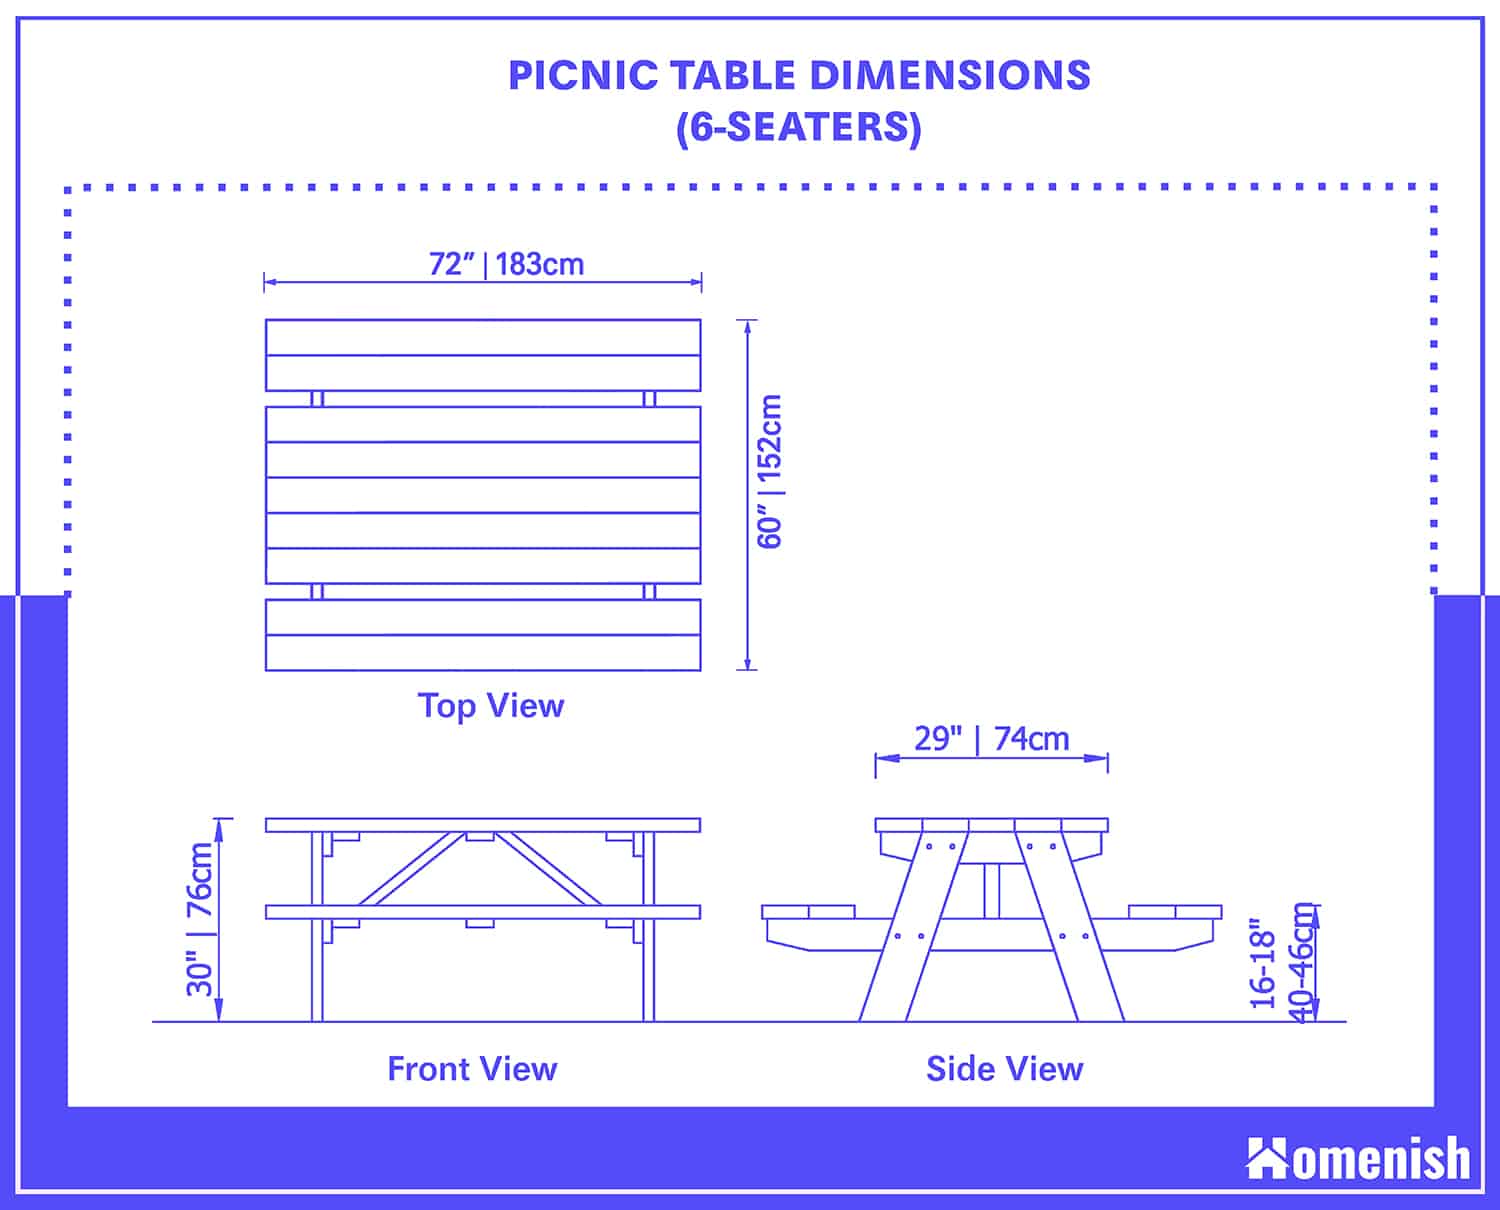 Standard Picnic Table Dimensions With, Dining Room Bench Depth